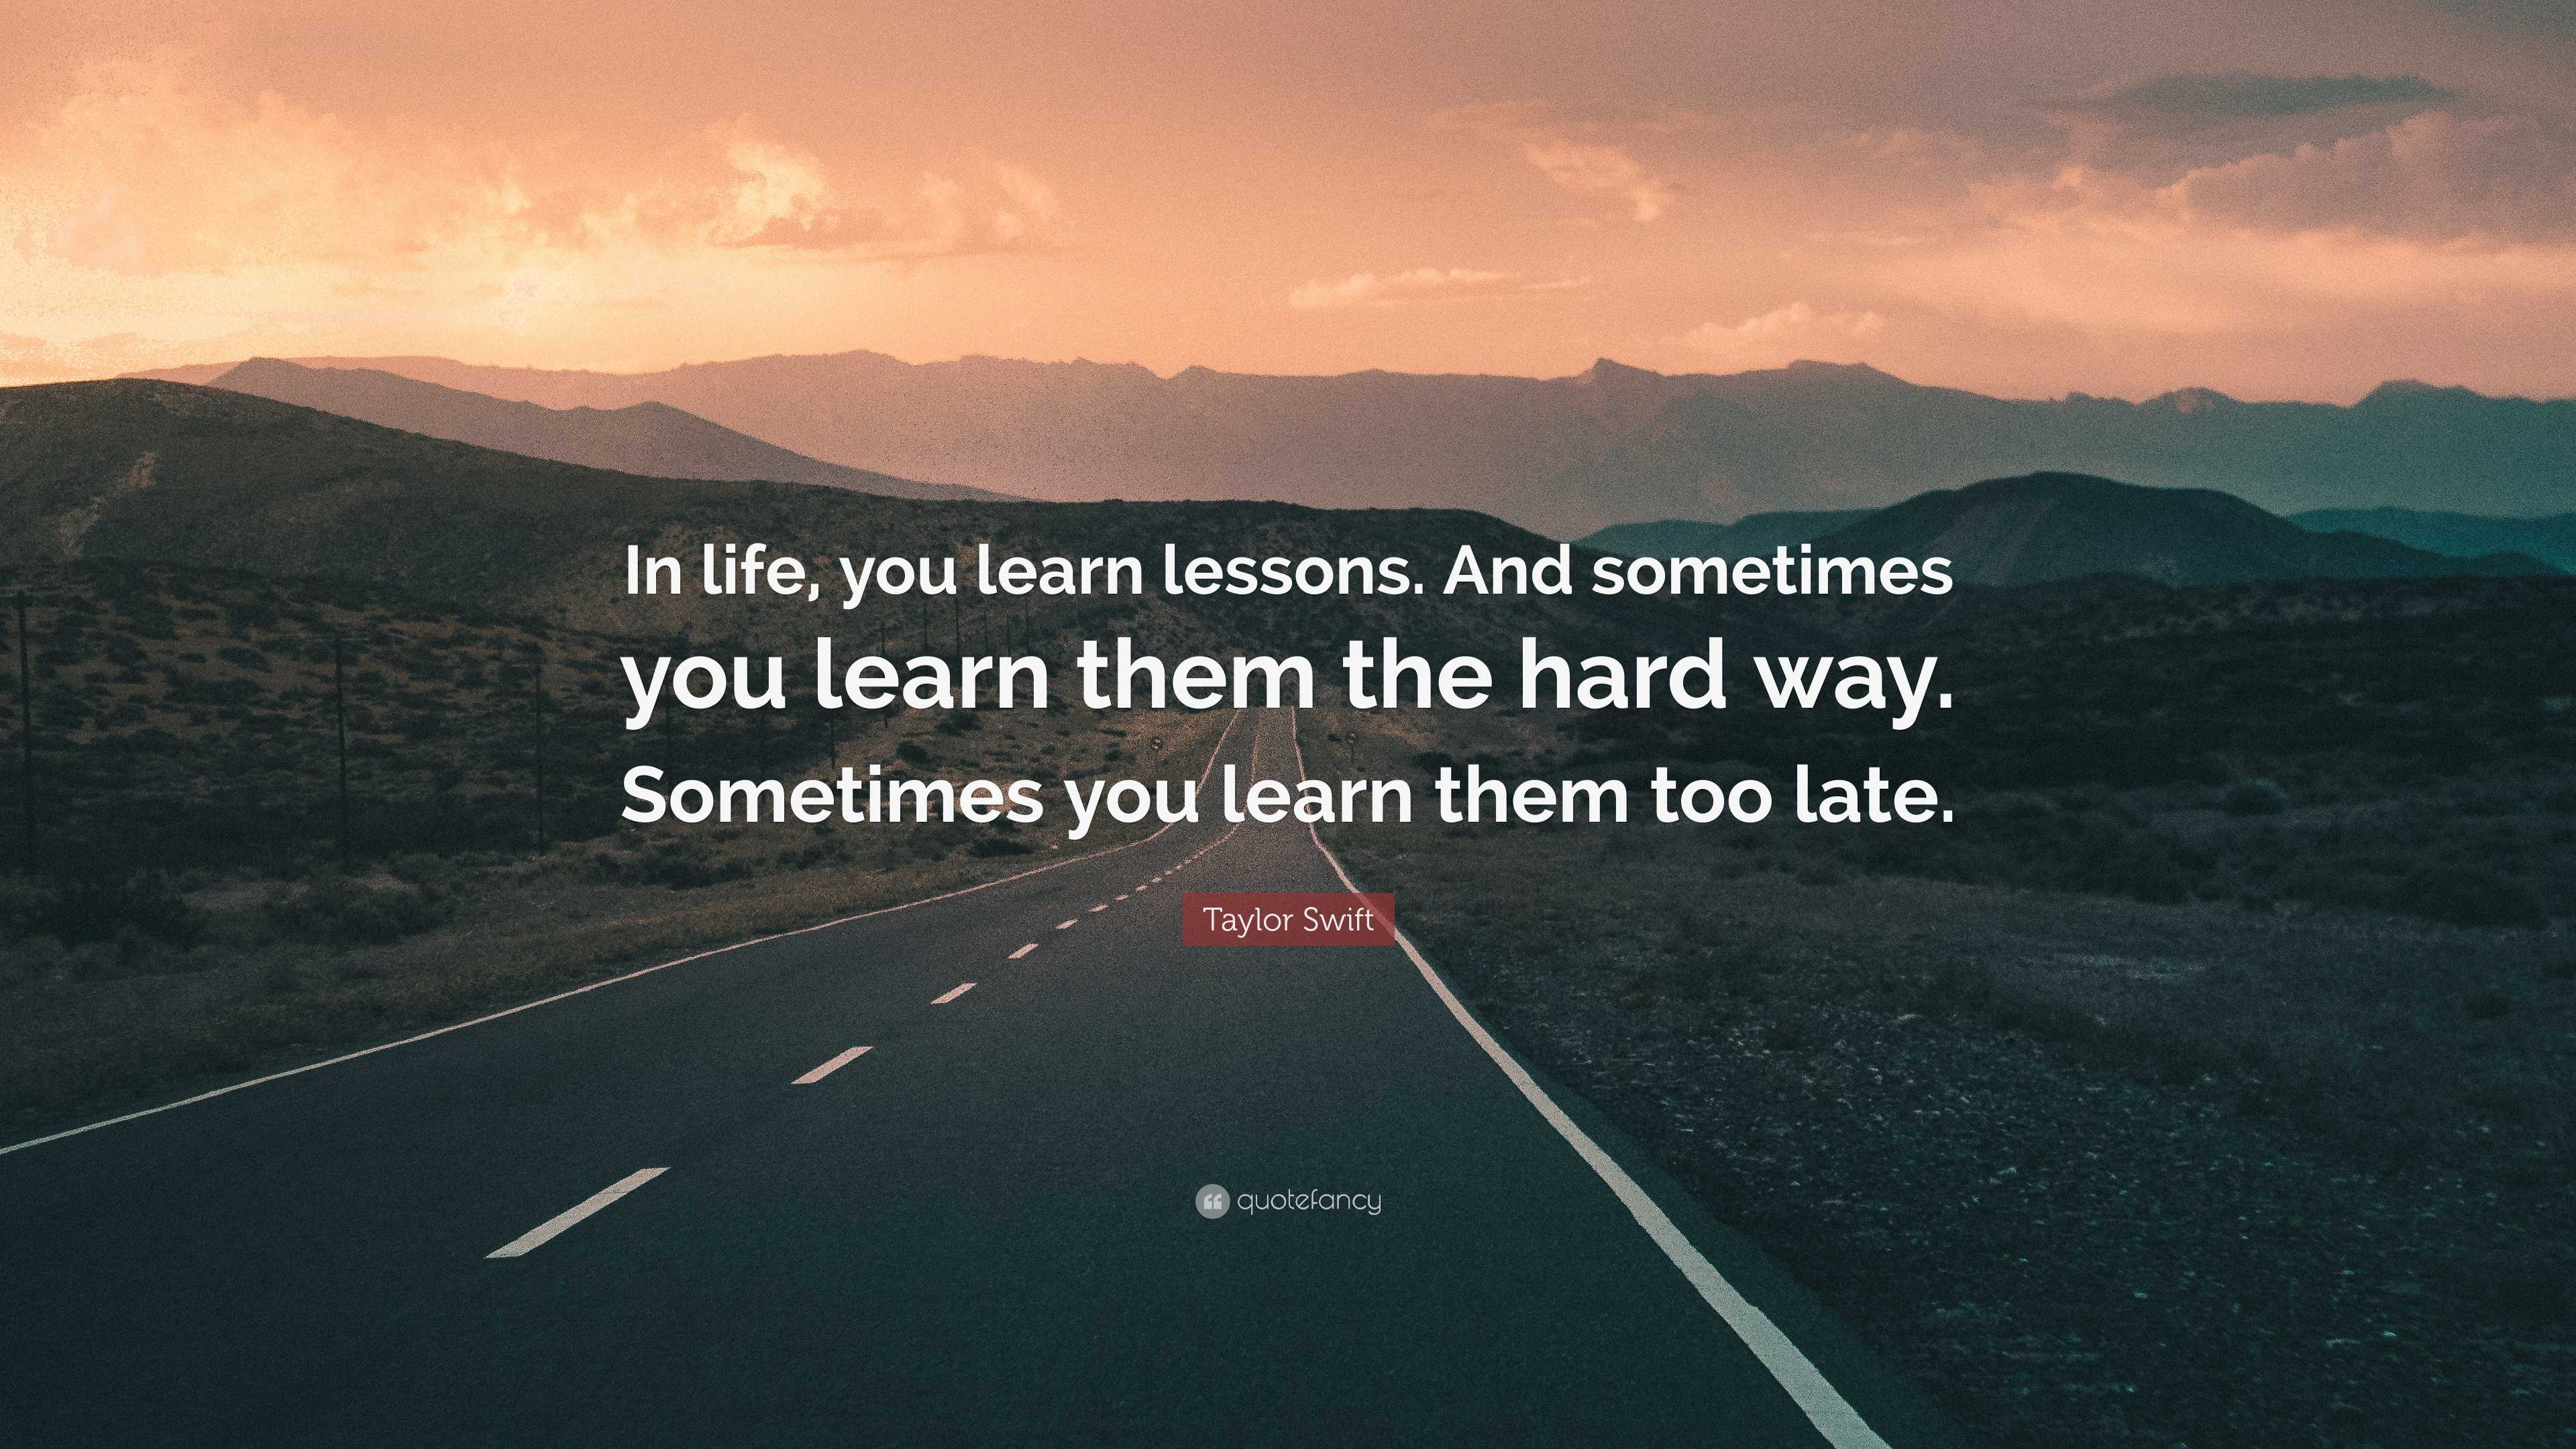 unless you enjoy learning lessons the hard way 😈